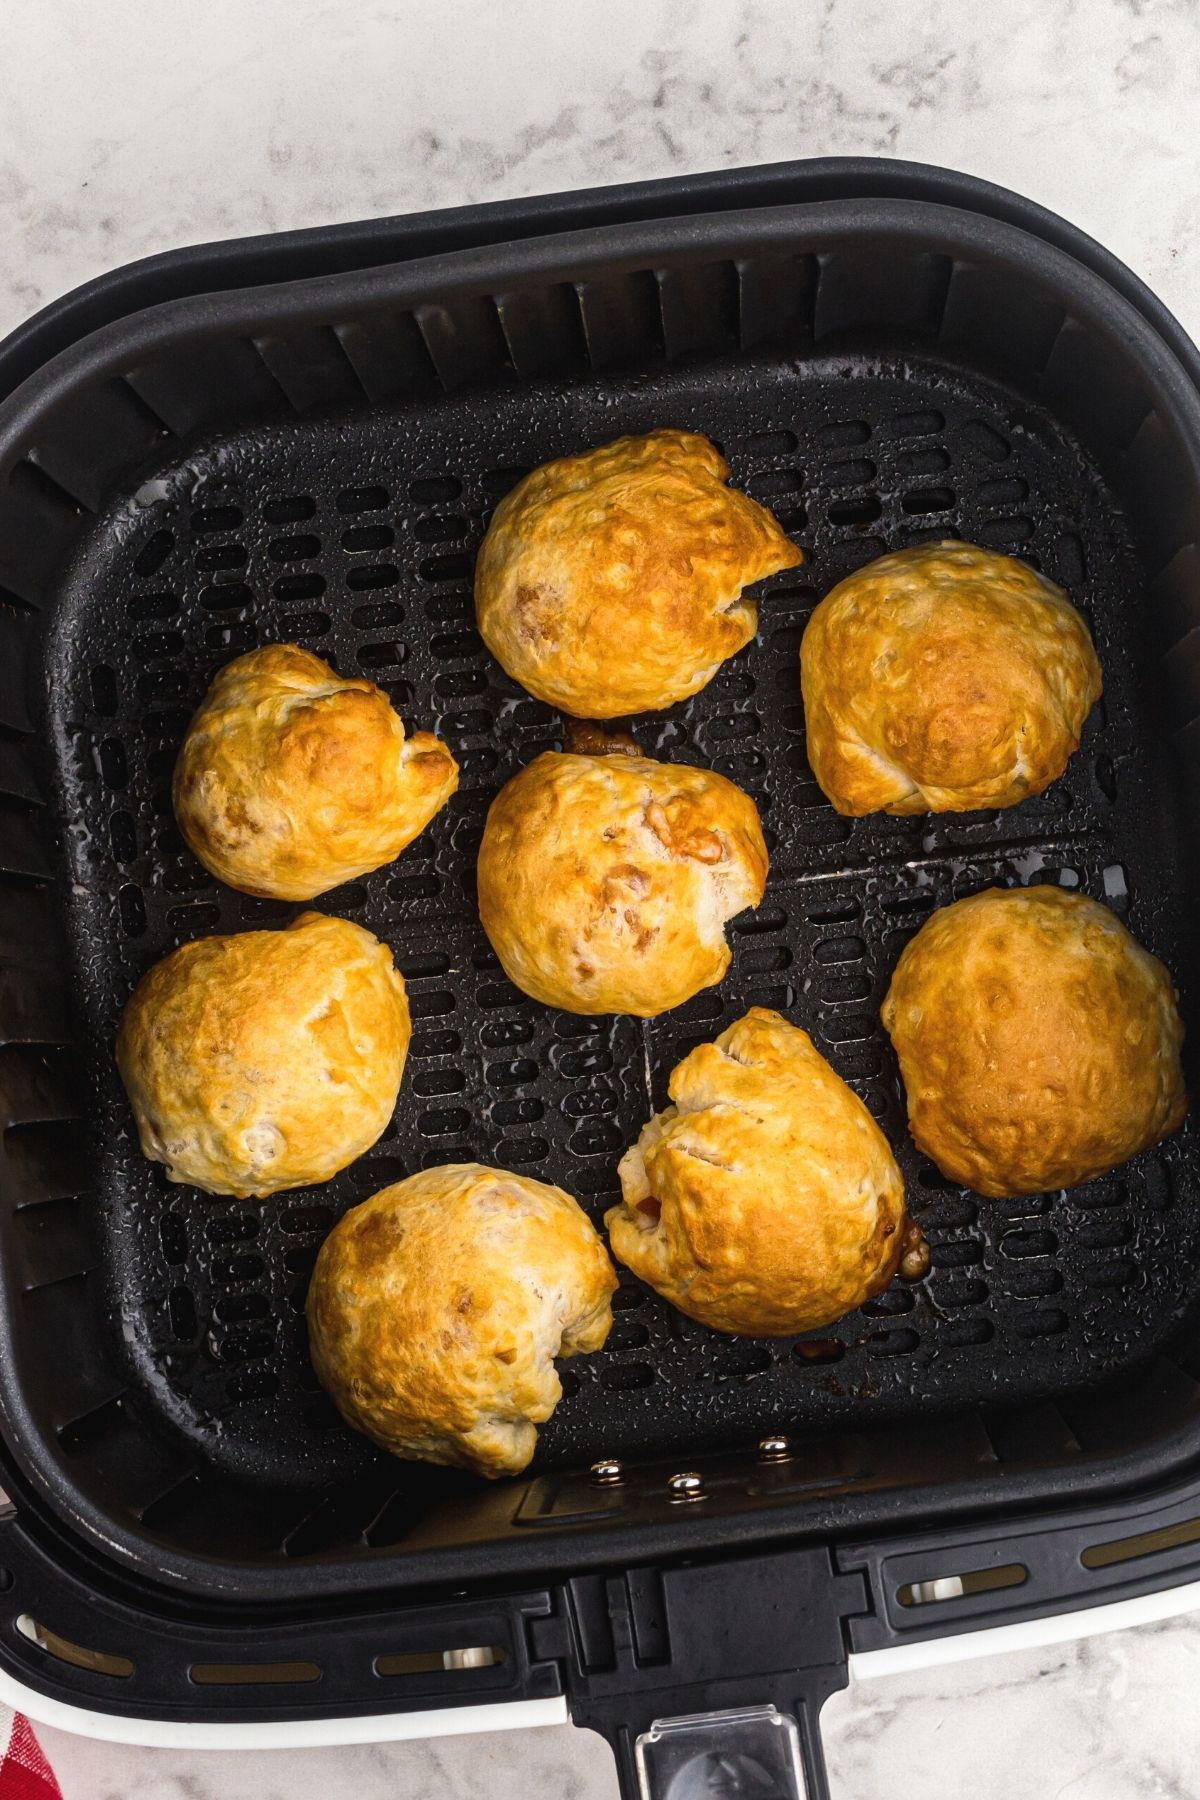 Golden biscuits filled with pizza toppings and cooked in the air fryer basket